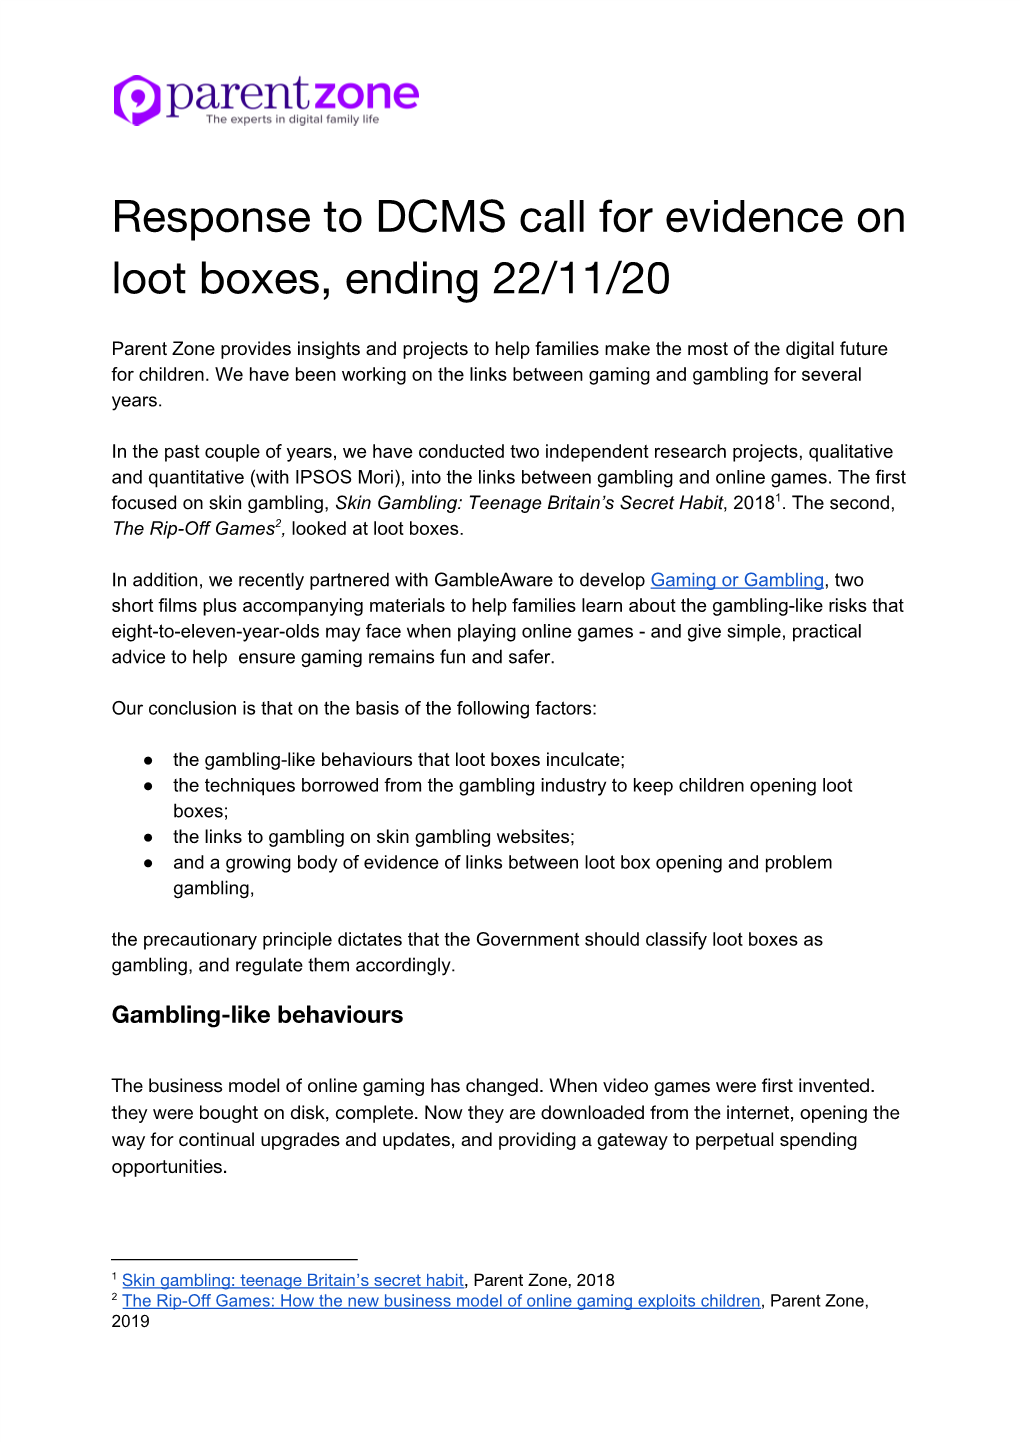 Response to DCMS Call for Evidence on Loot Boxes, Ending 22/11/20